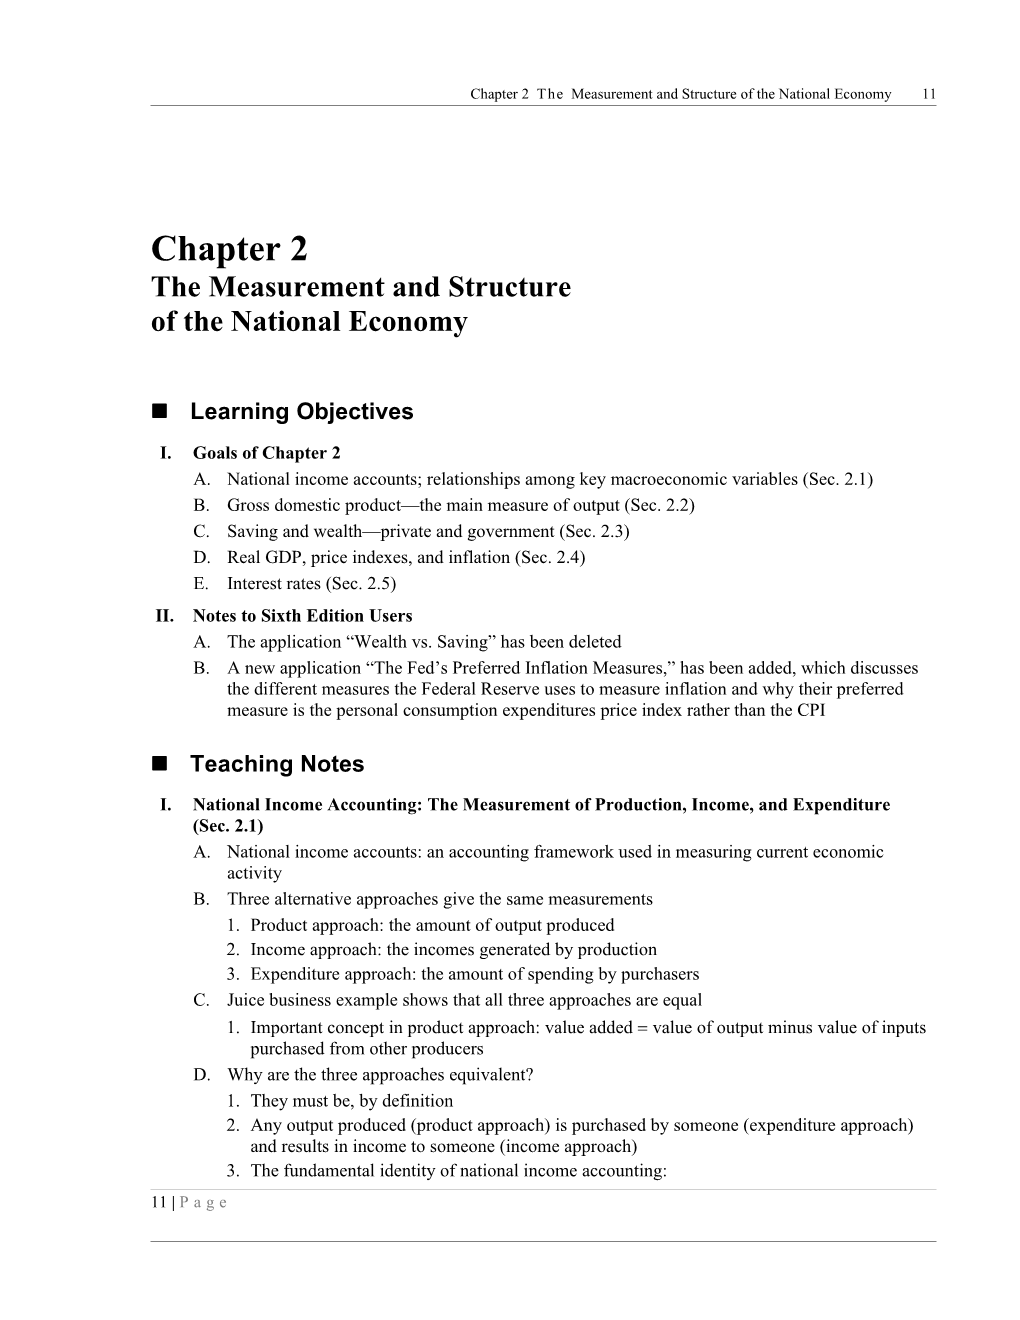 Chapter 2 the Measurement and Structure of the National Economy 1